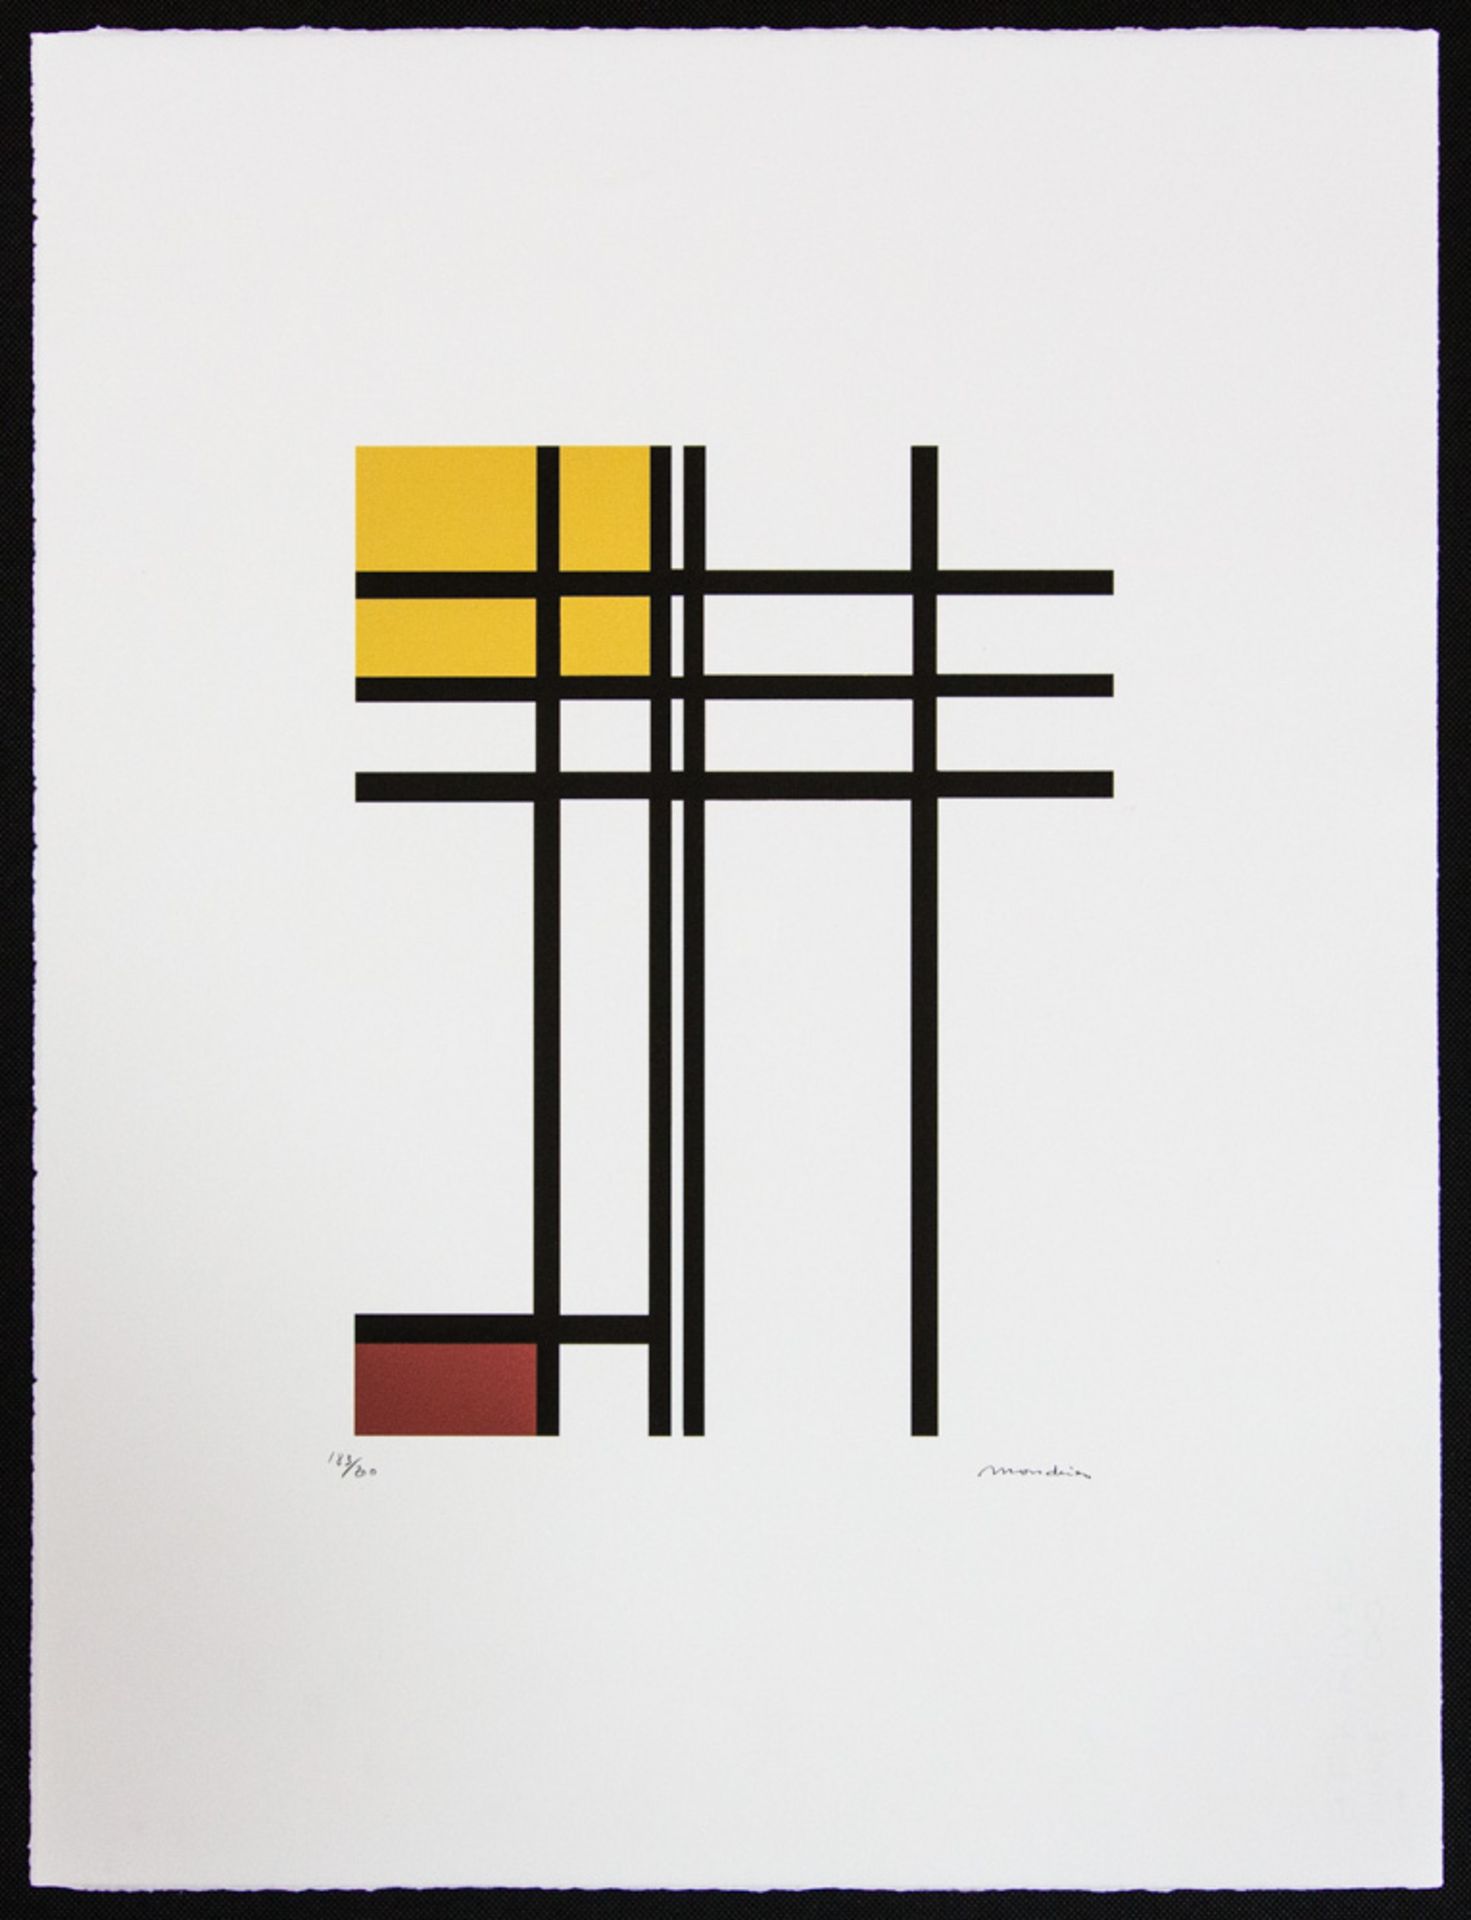 Piet Mondrian 'Opposition of Lines, Red and Yellow' - Image 2 of 5